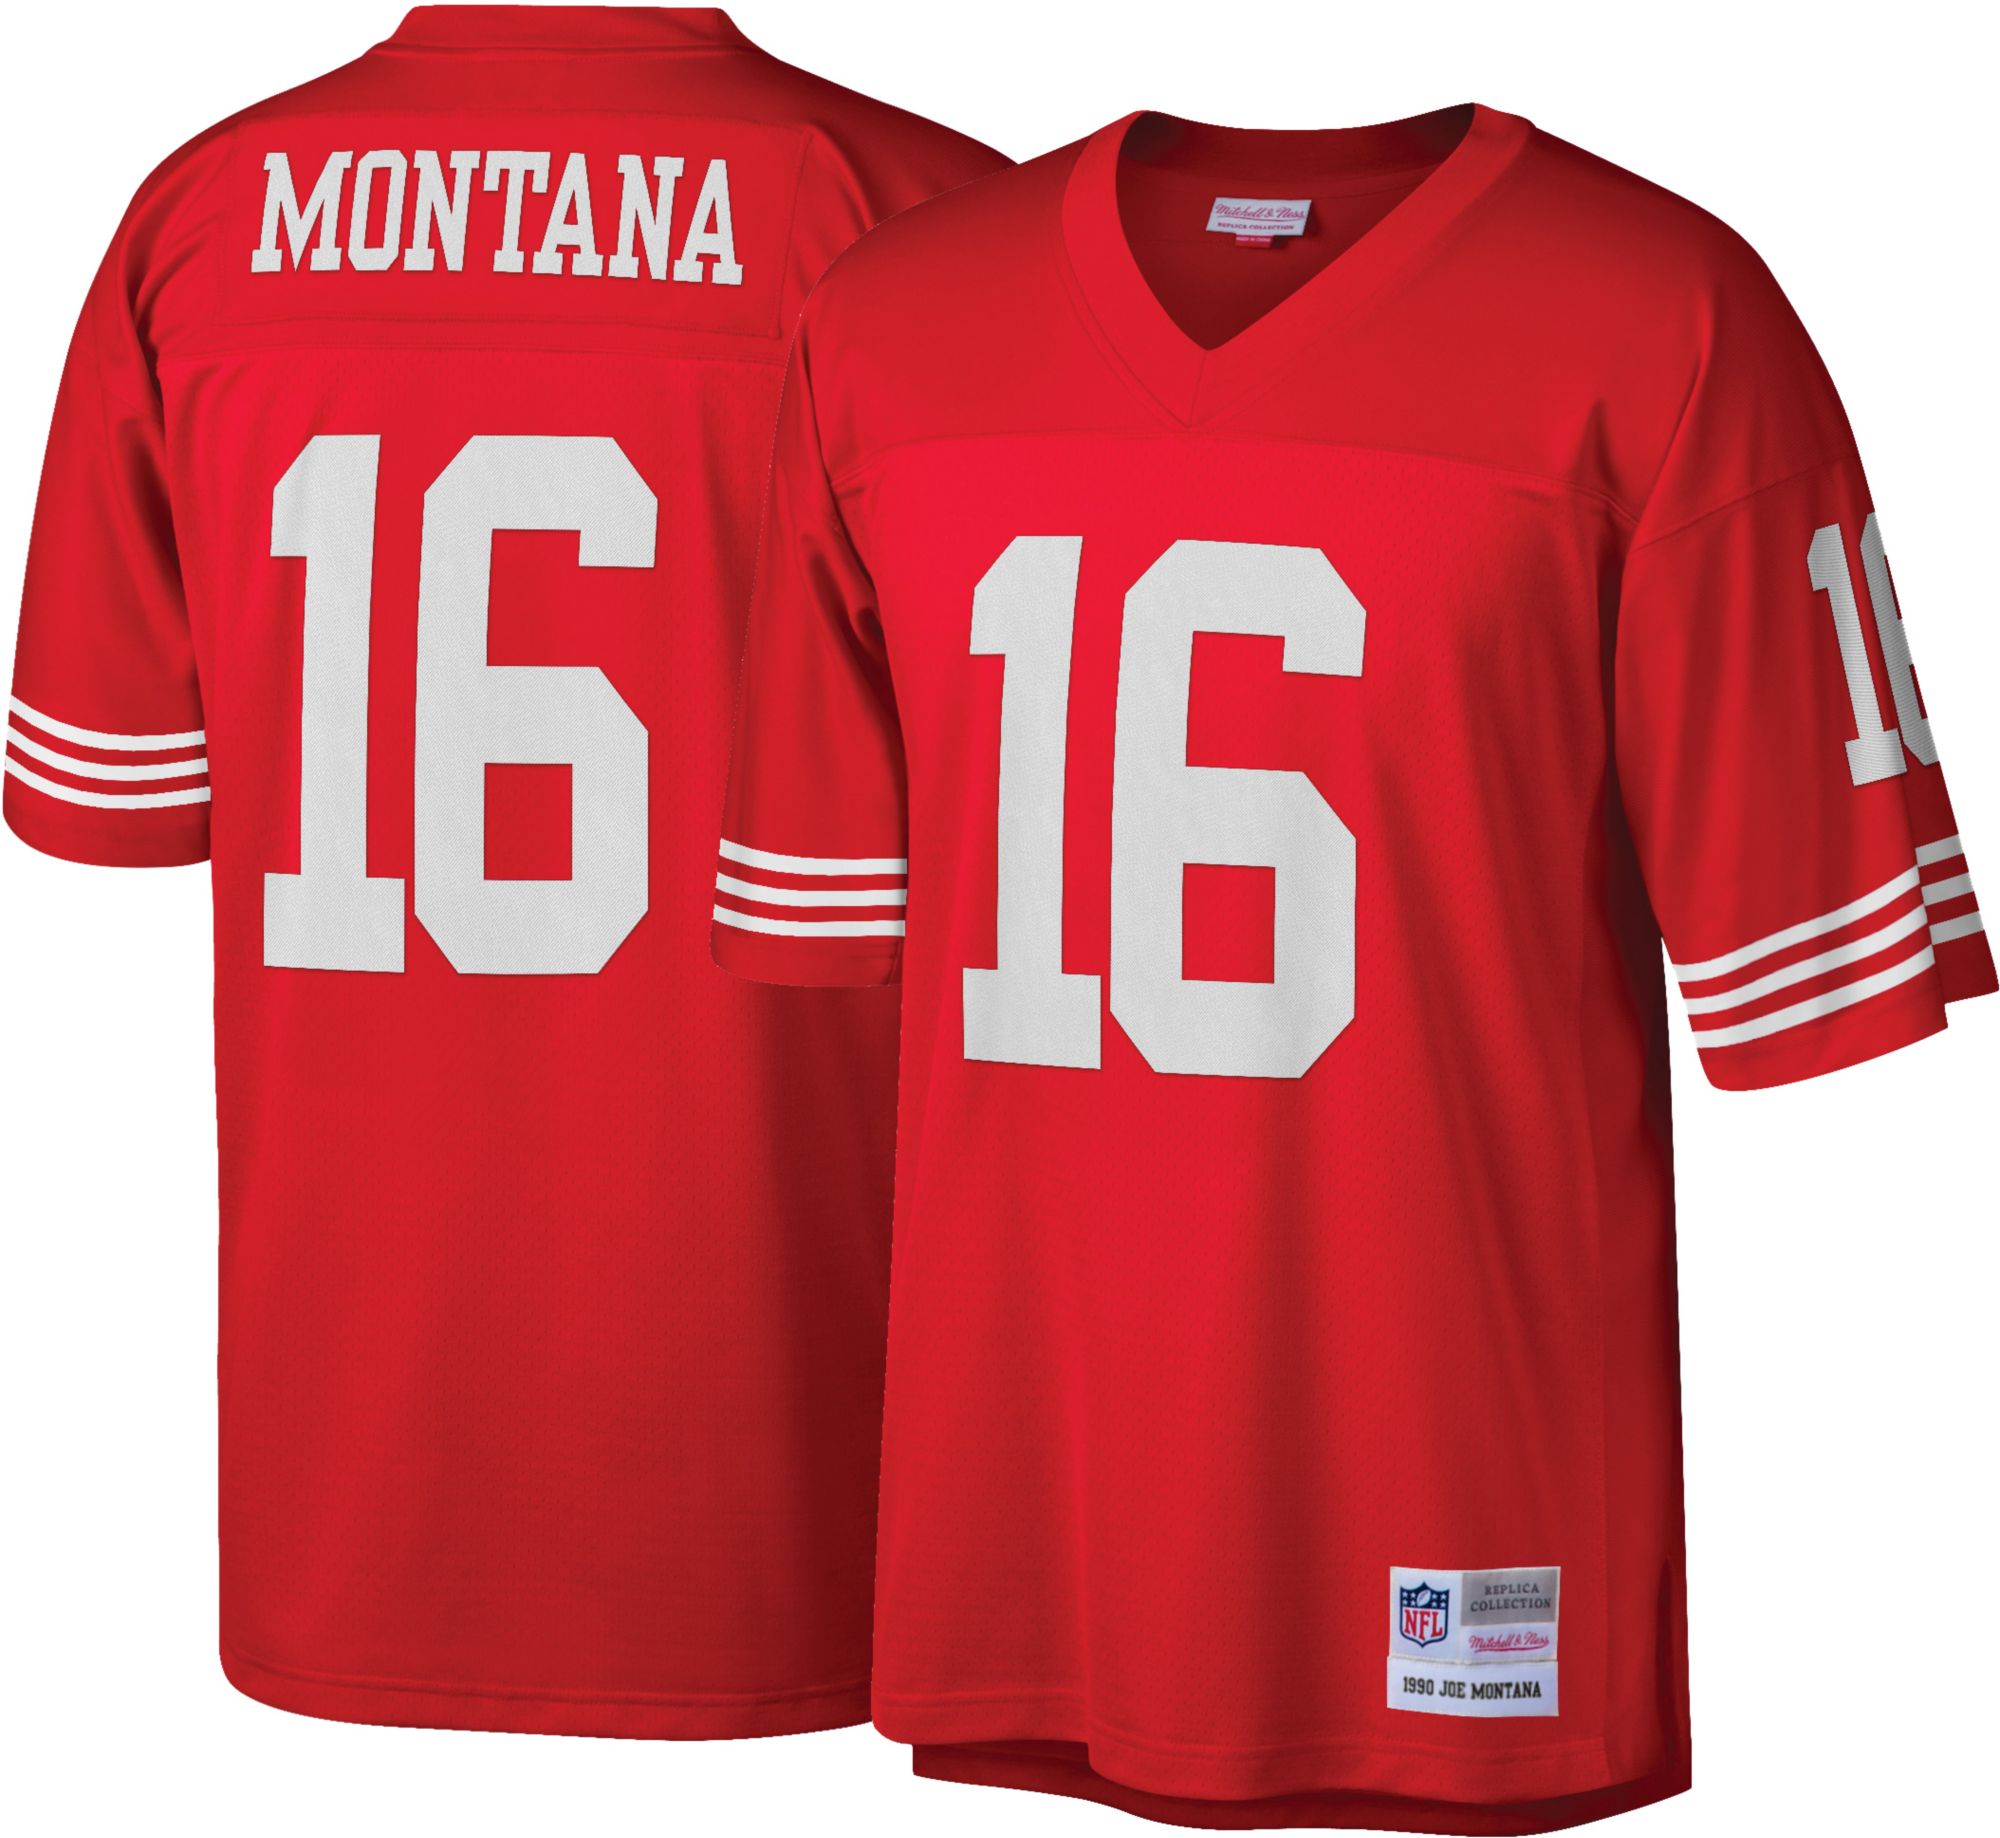 san francisco 49ers official online store